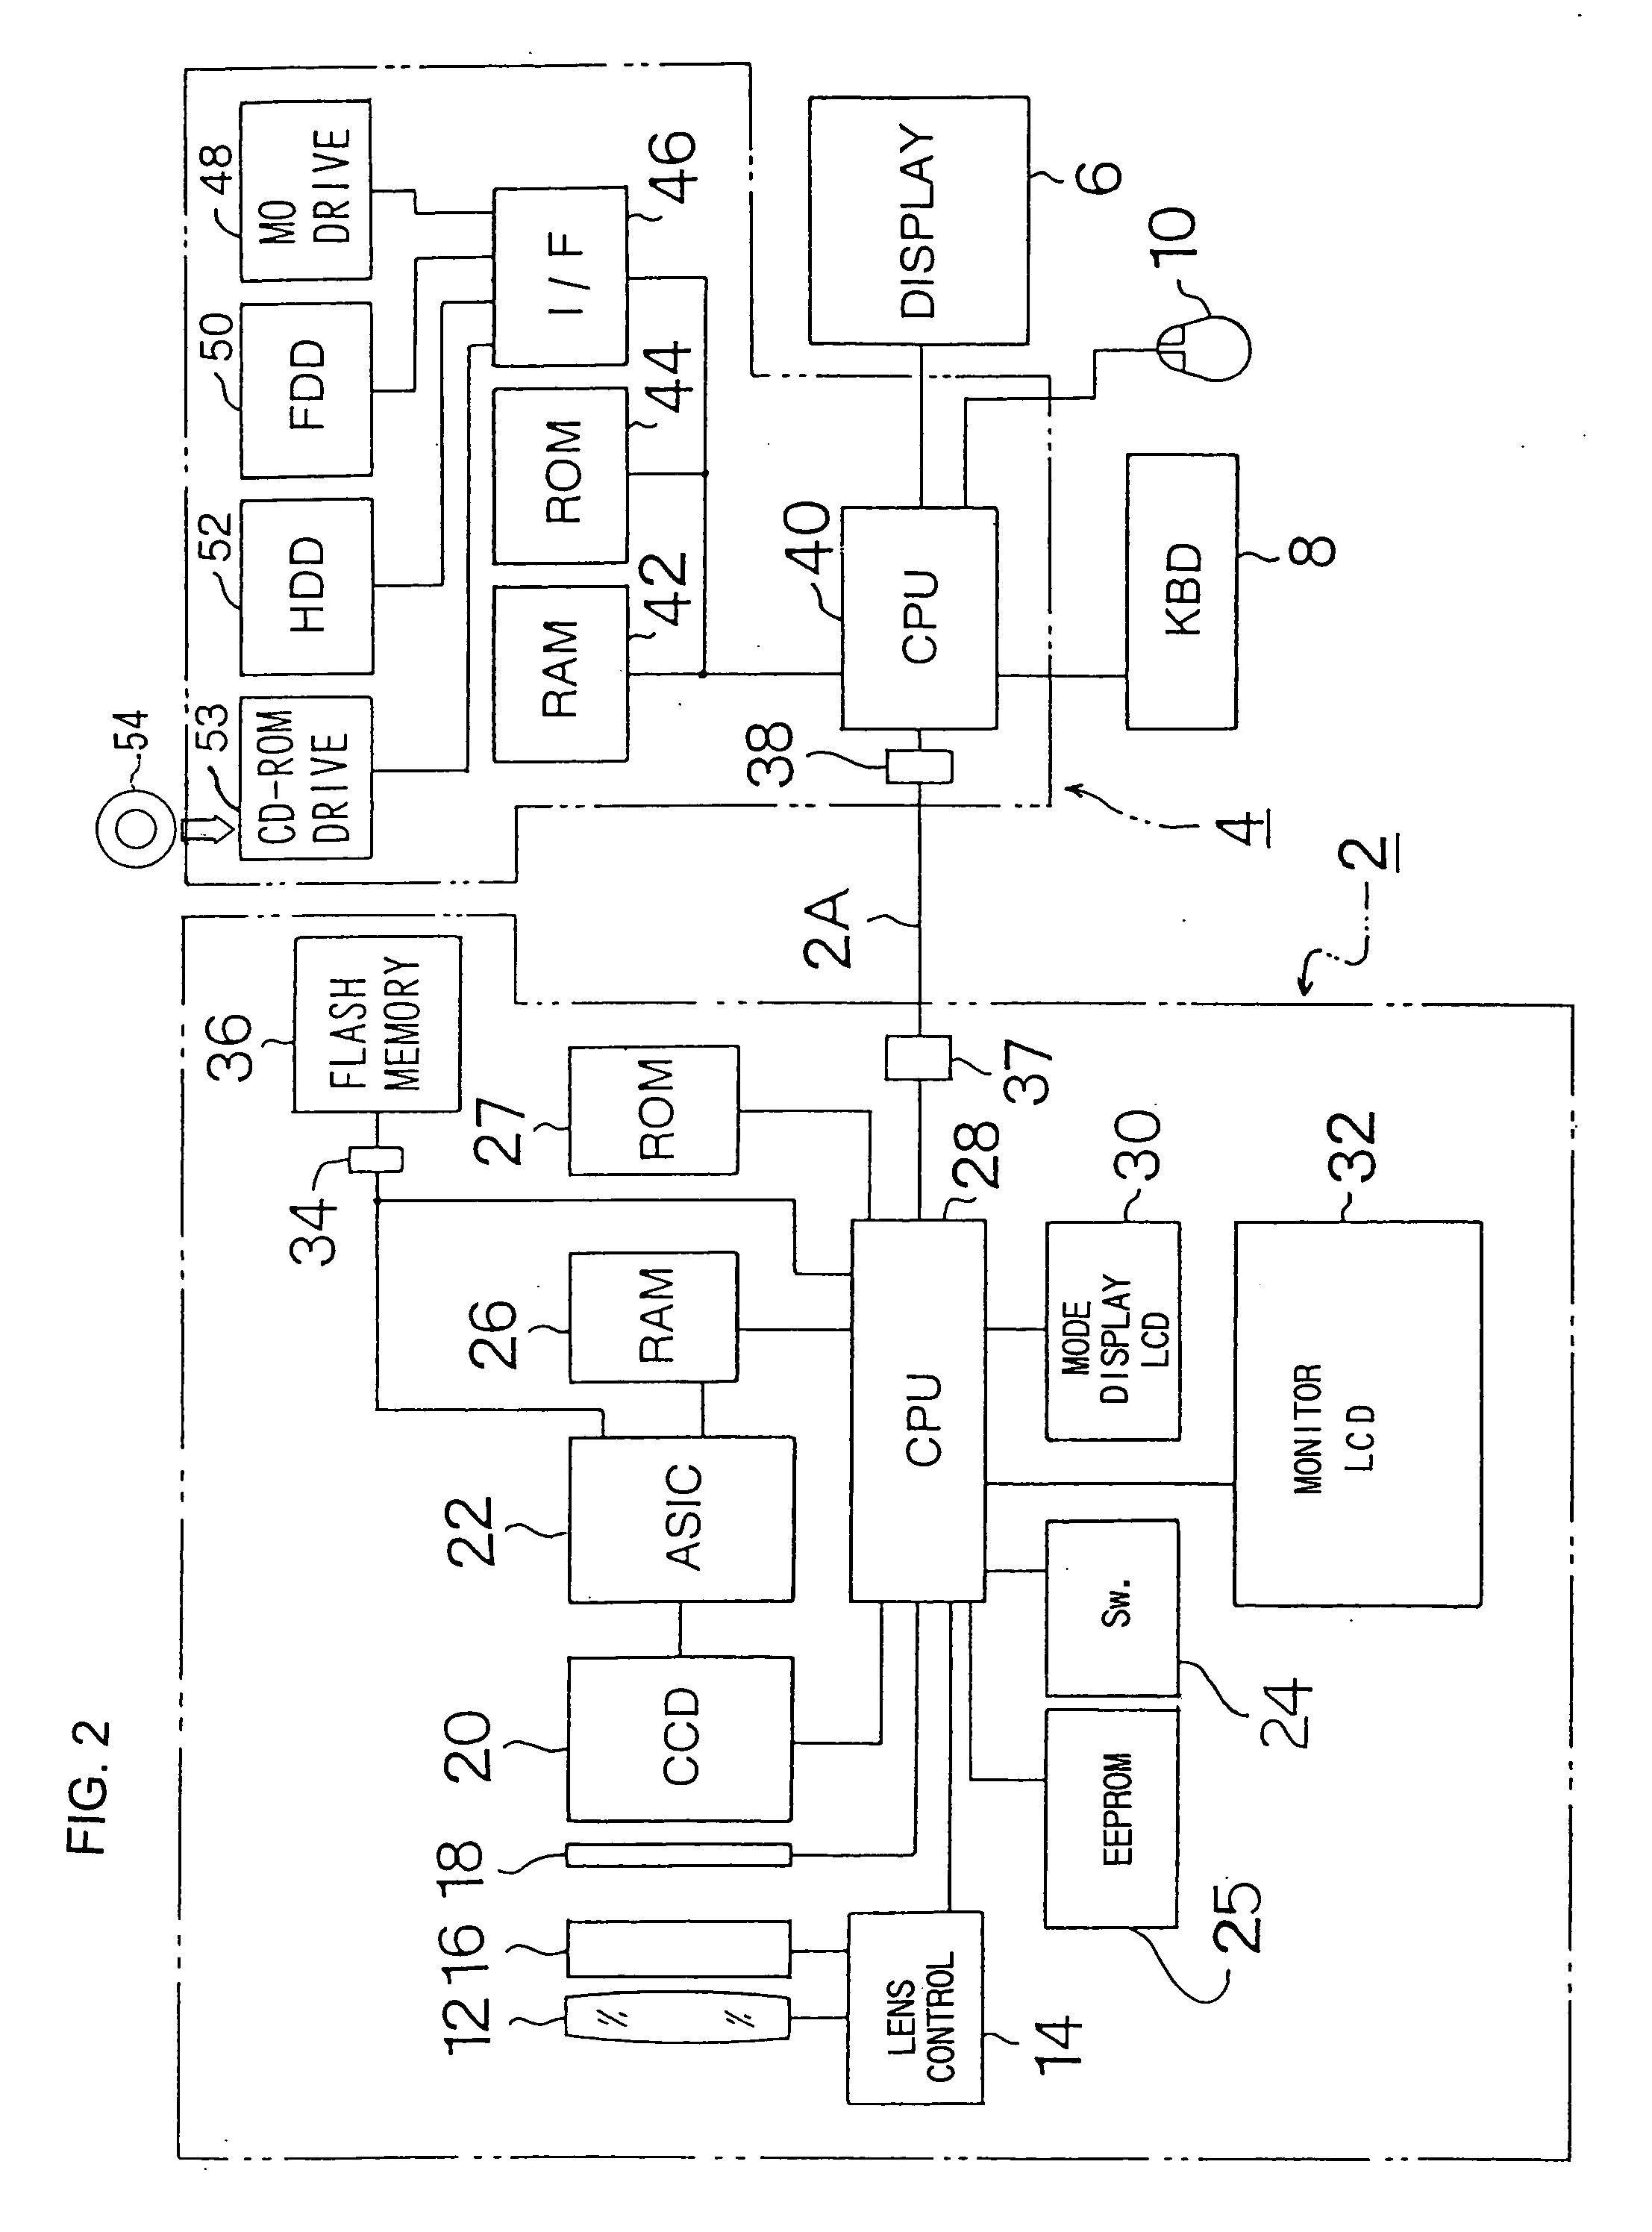 Information processing apparatus, information processing system, image input apparatus, image input system and information exchange method